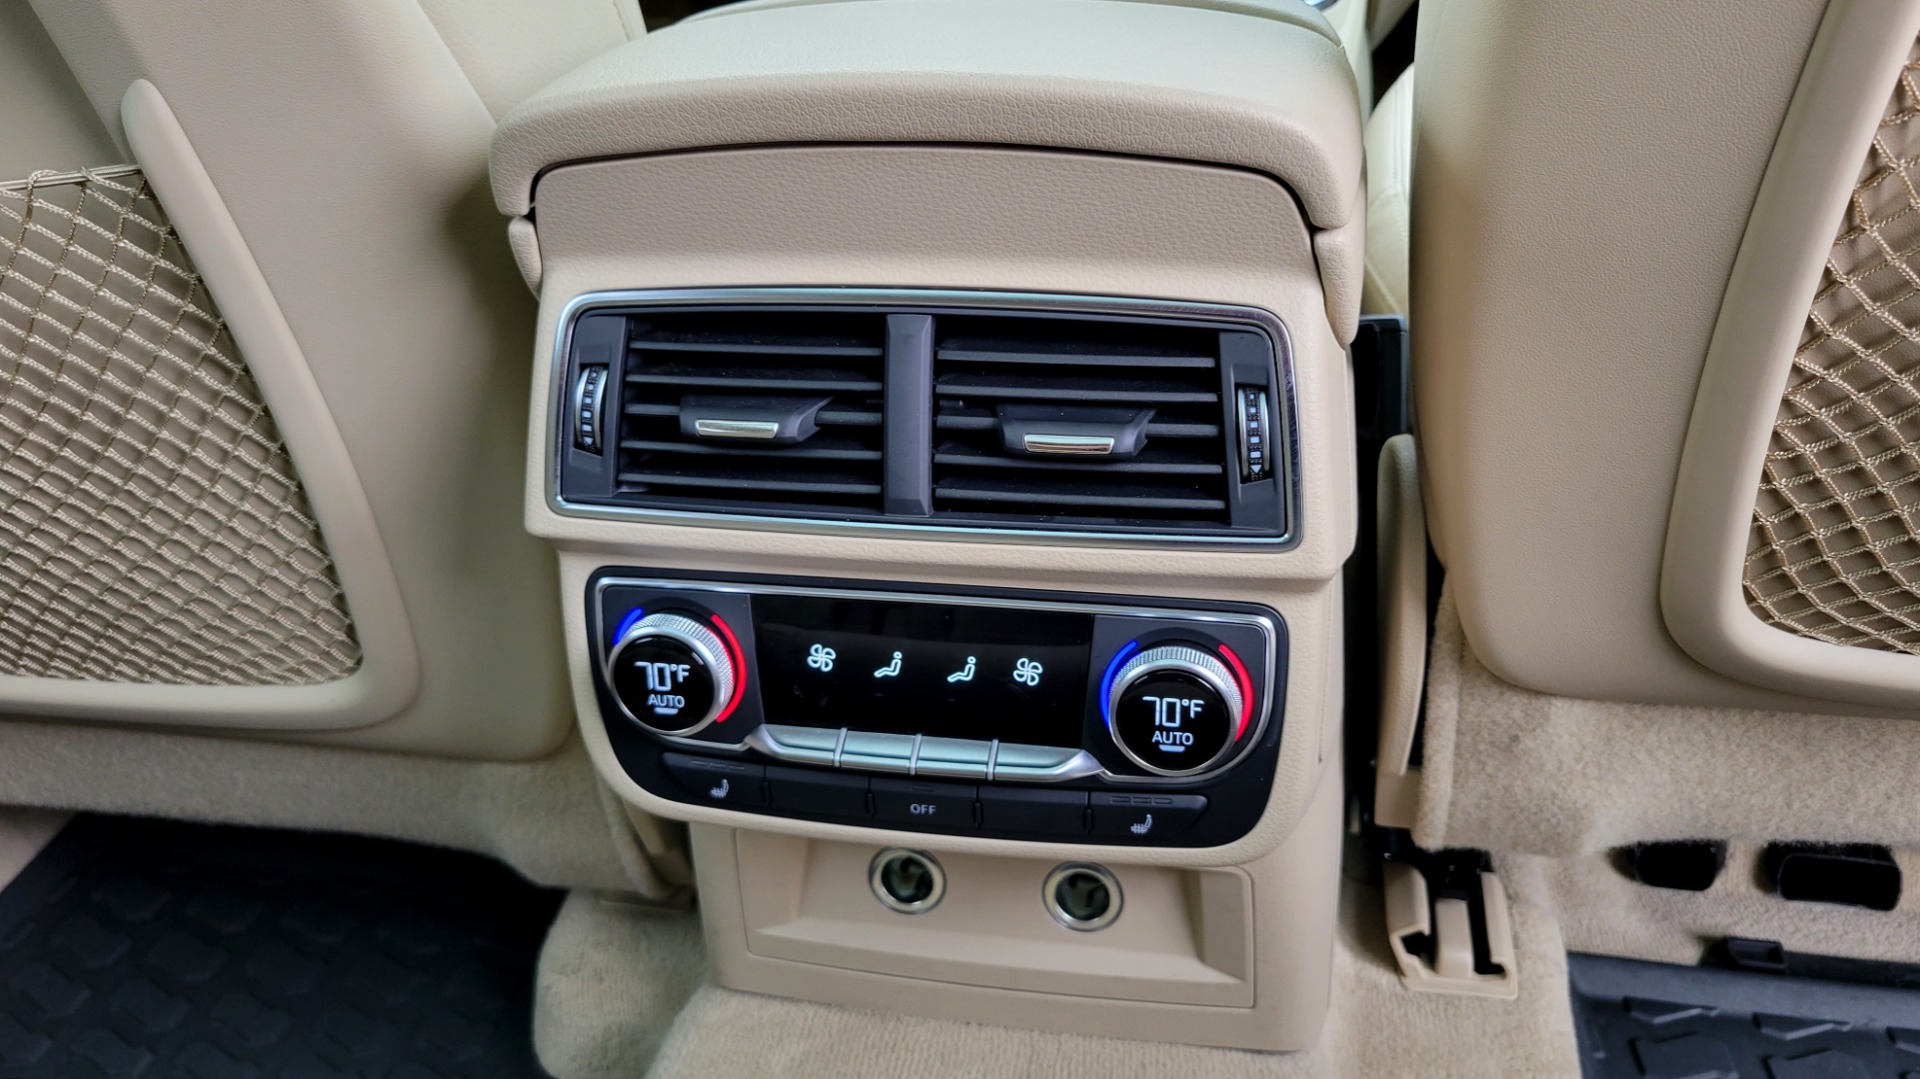 Used 2019 Audi Q7 PRESTIGE / CONV PKG / BOSE / HUD / CLD WTHR / TOWING / REARVIEW for sale $50,295 at Formula Imports in Charlotte NC 28227 97